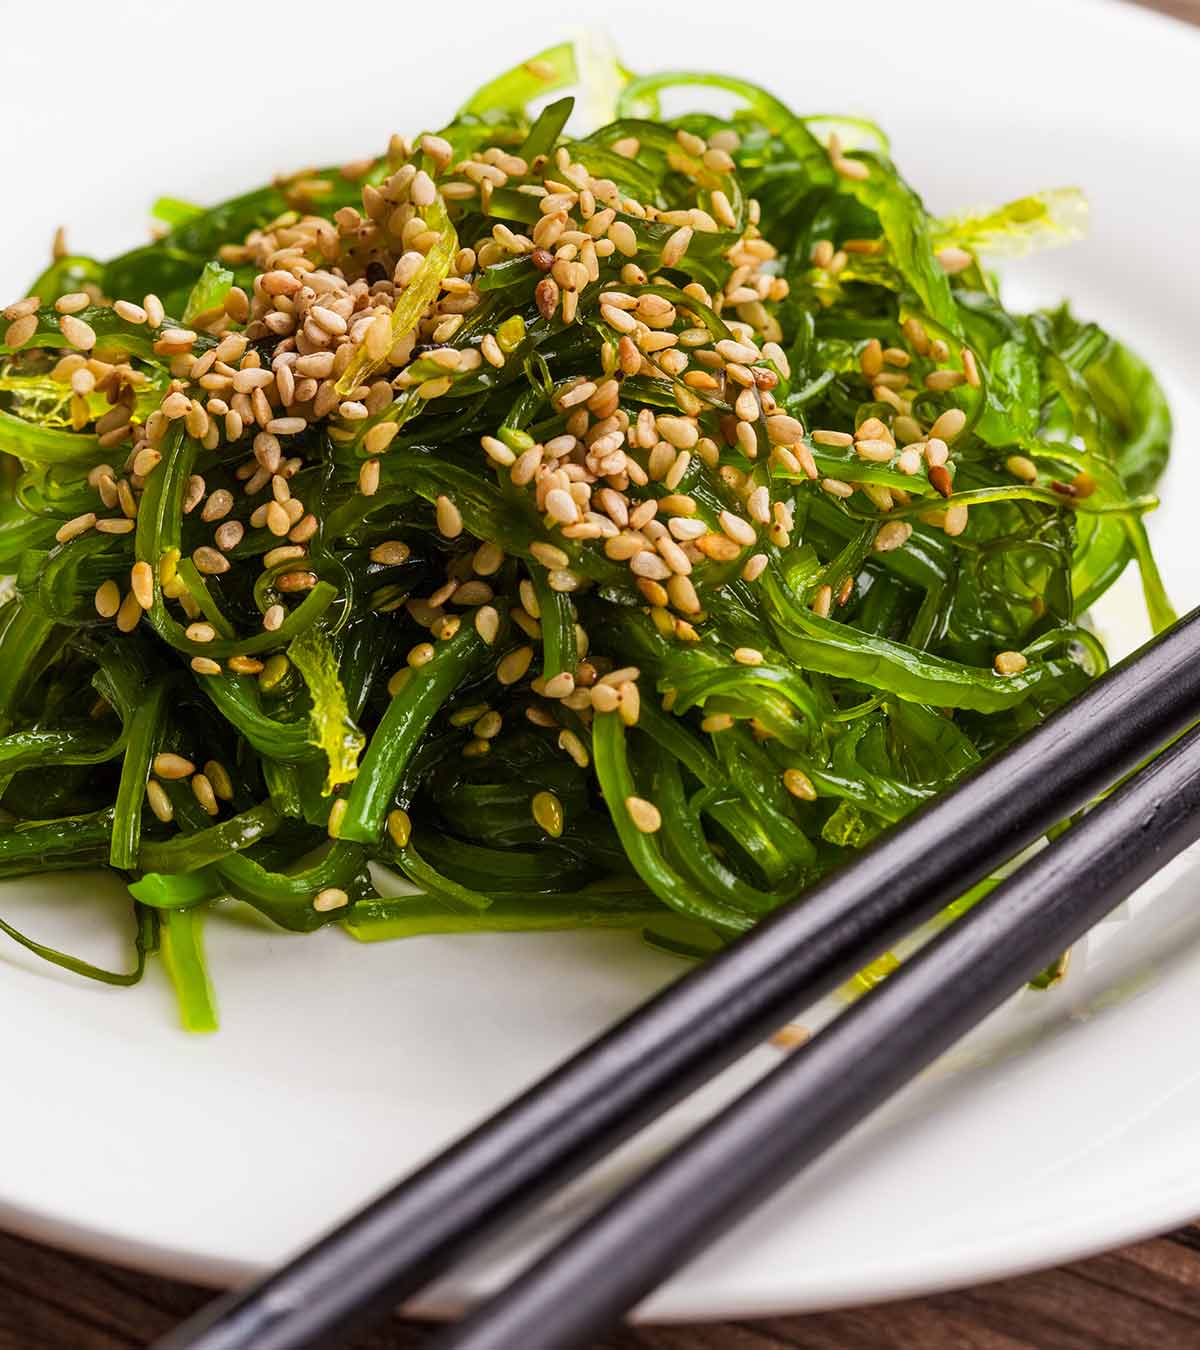 Is It Safe To Eat Seaweed During Pregnancy?